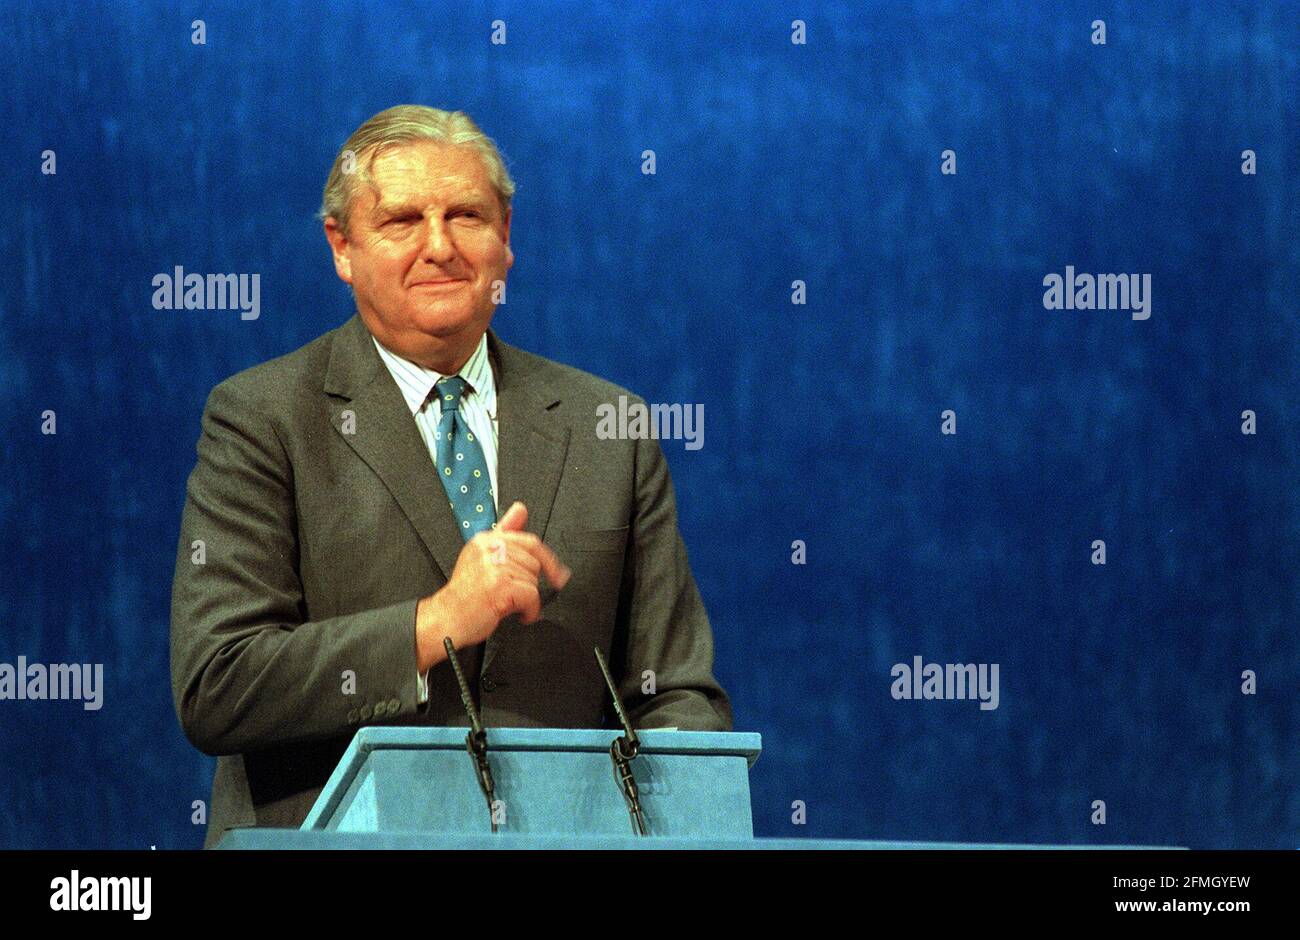 Sir Patrick Mayhew the Northen Ireland Minister speaking at the 1995 Tory Conference   Dbase Stock Photo